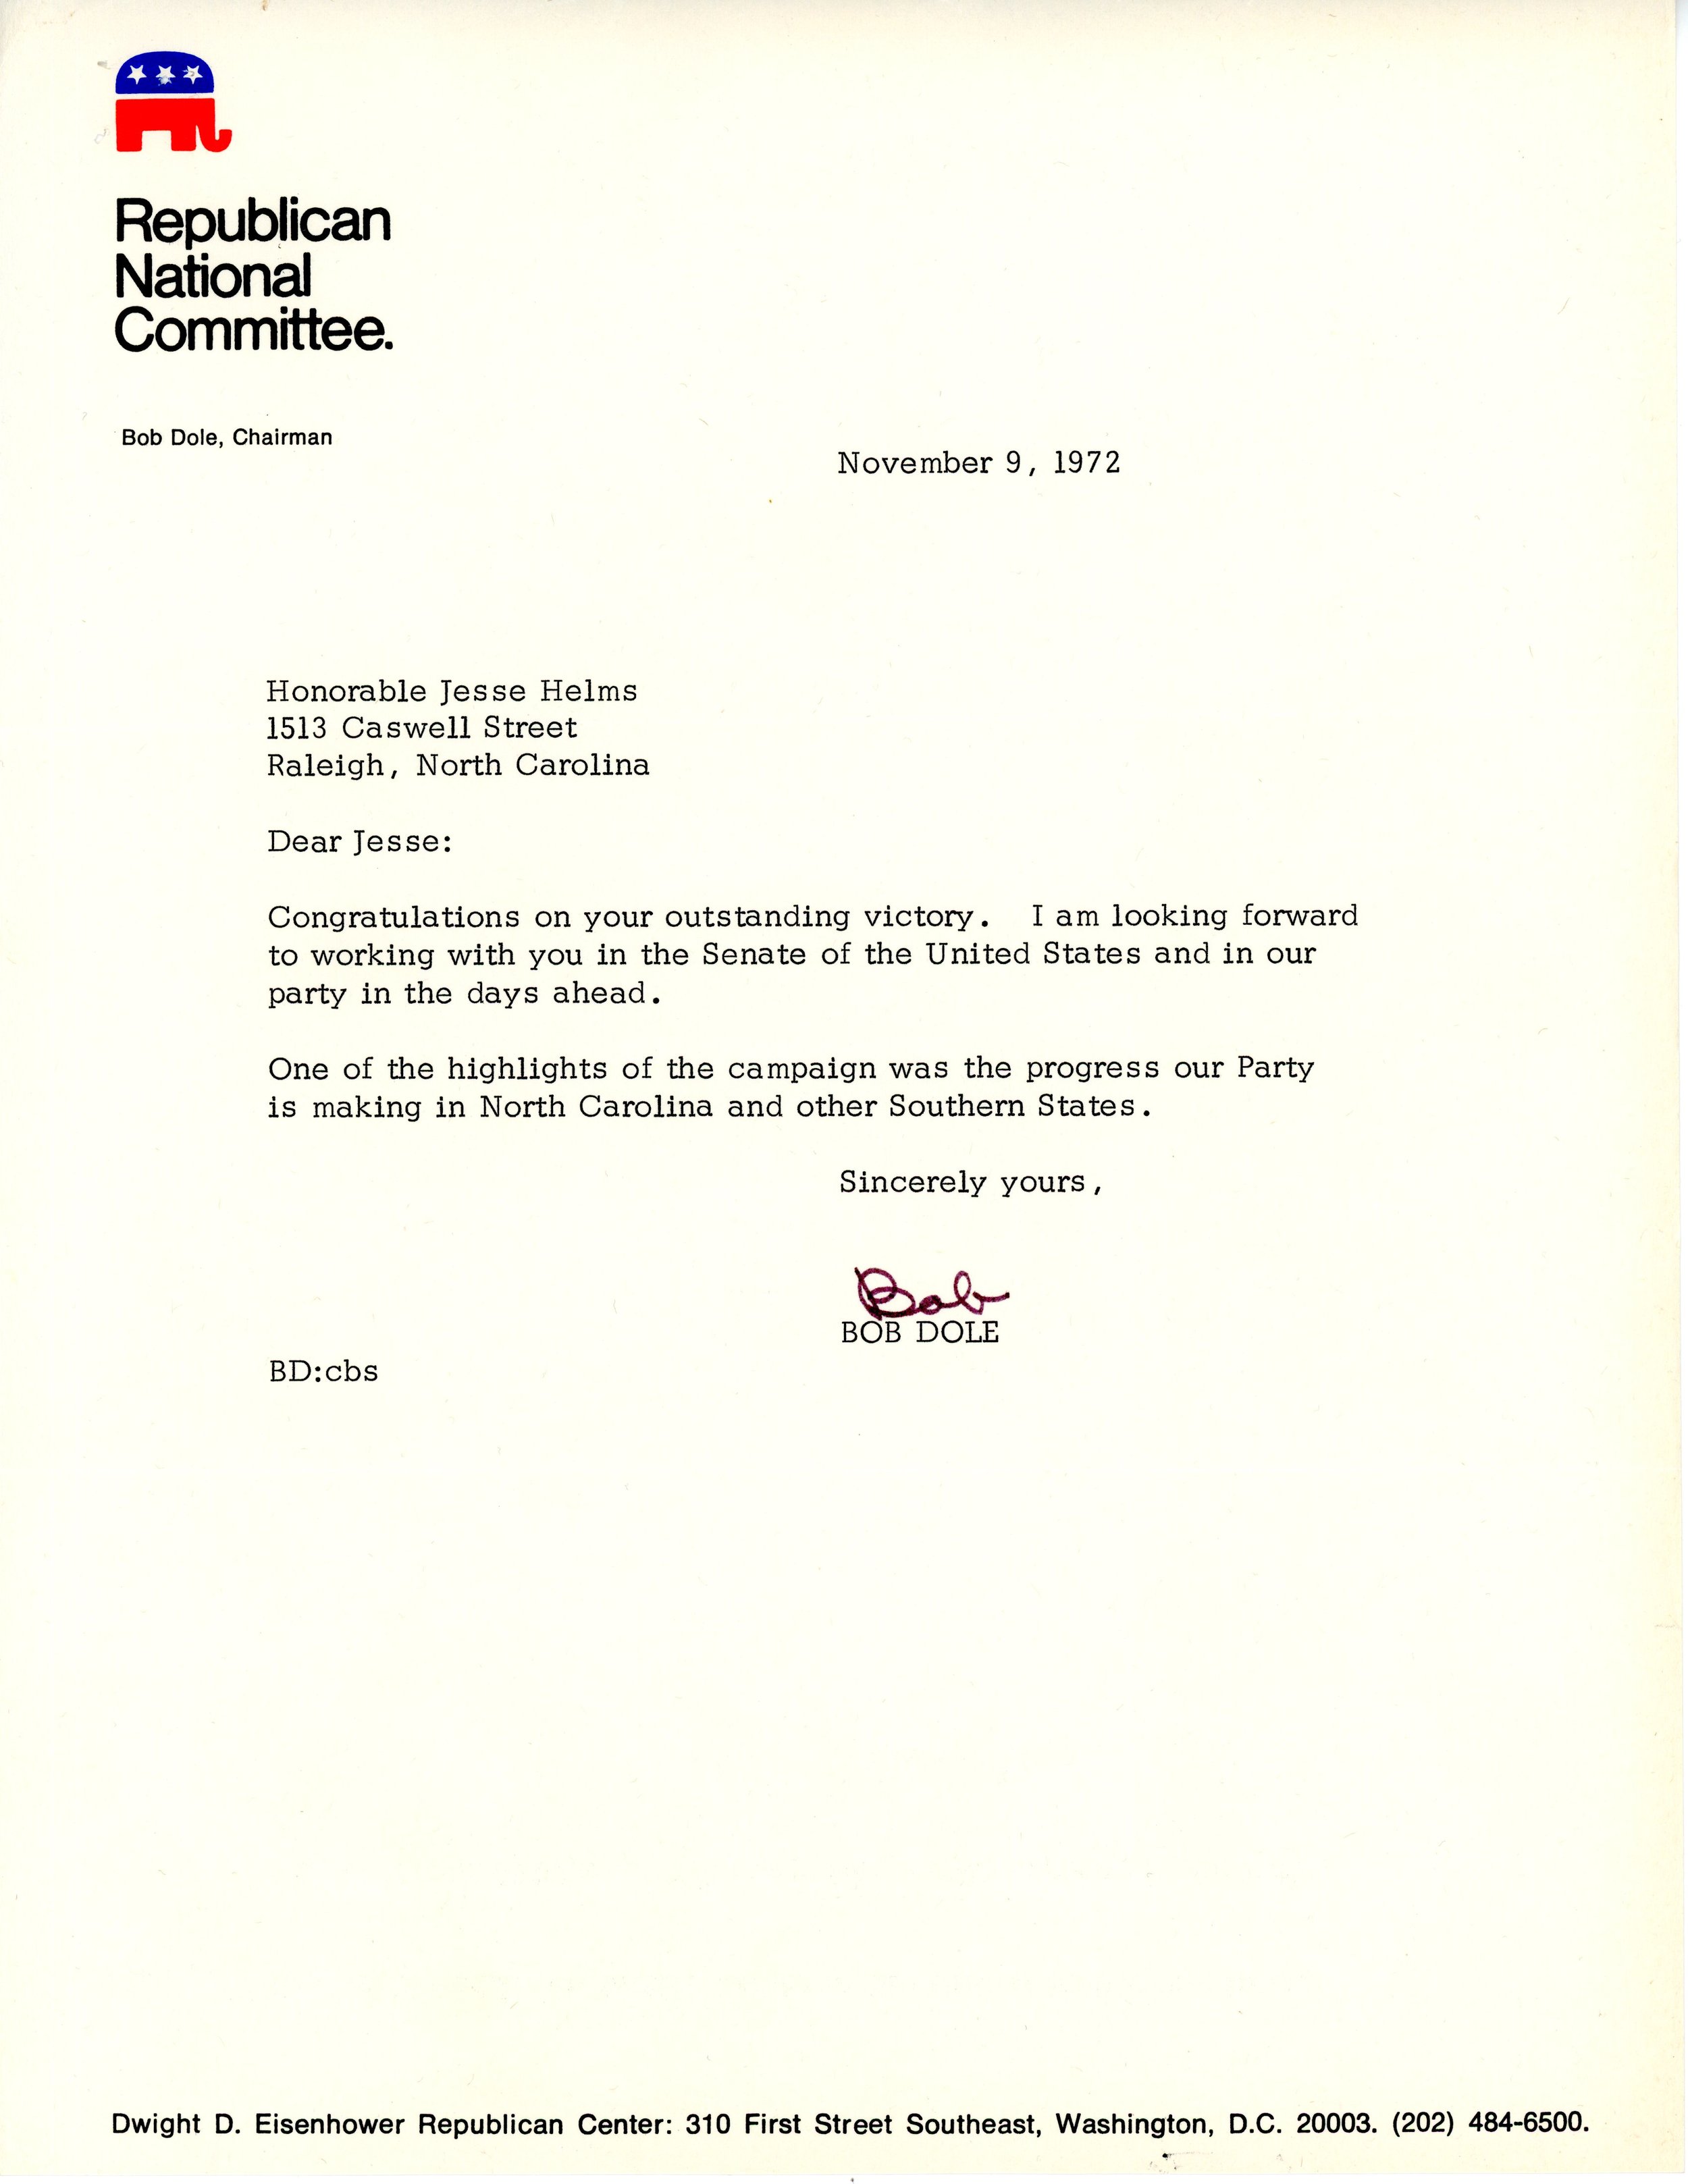 Letter of congratulations to newly elected Senator Jesse Helms from Bob Dole.